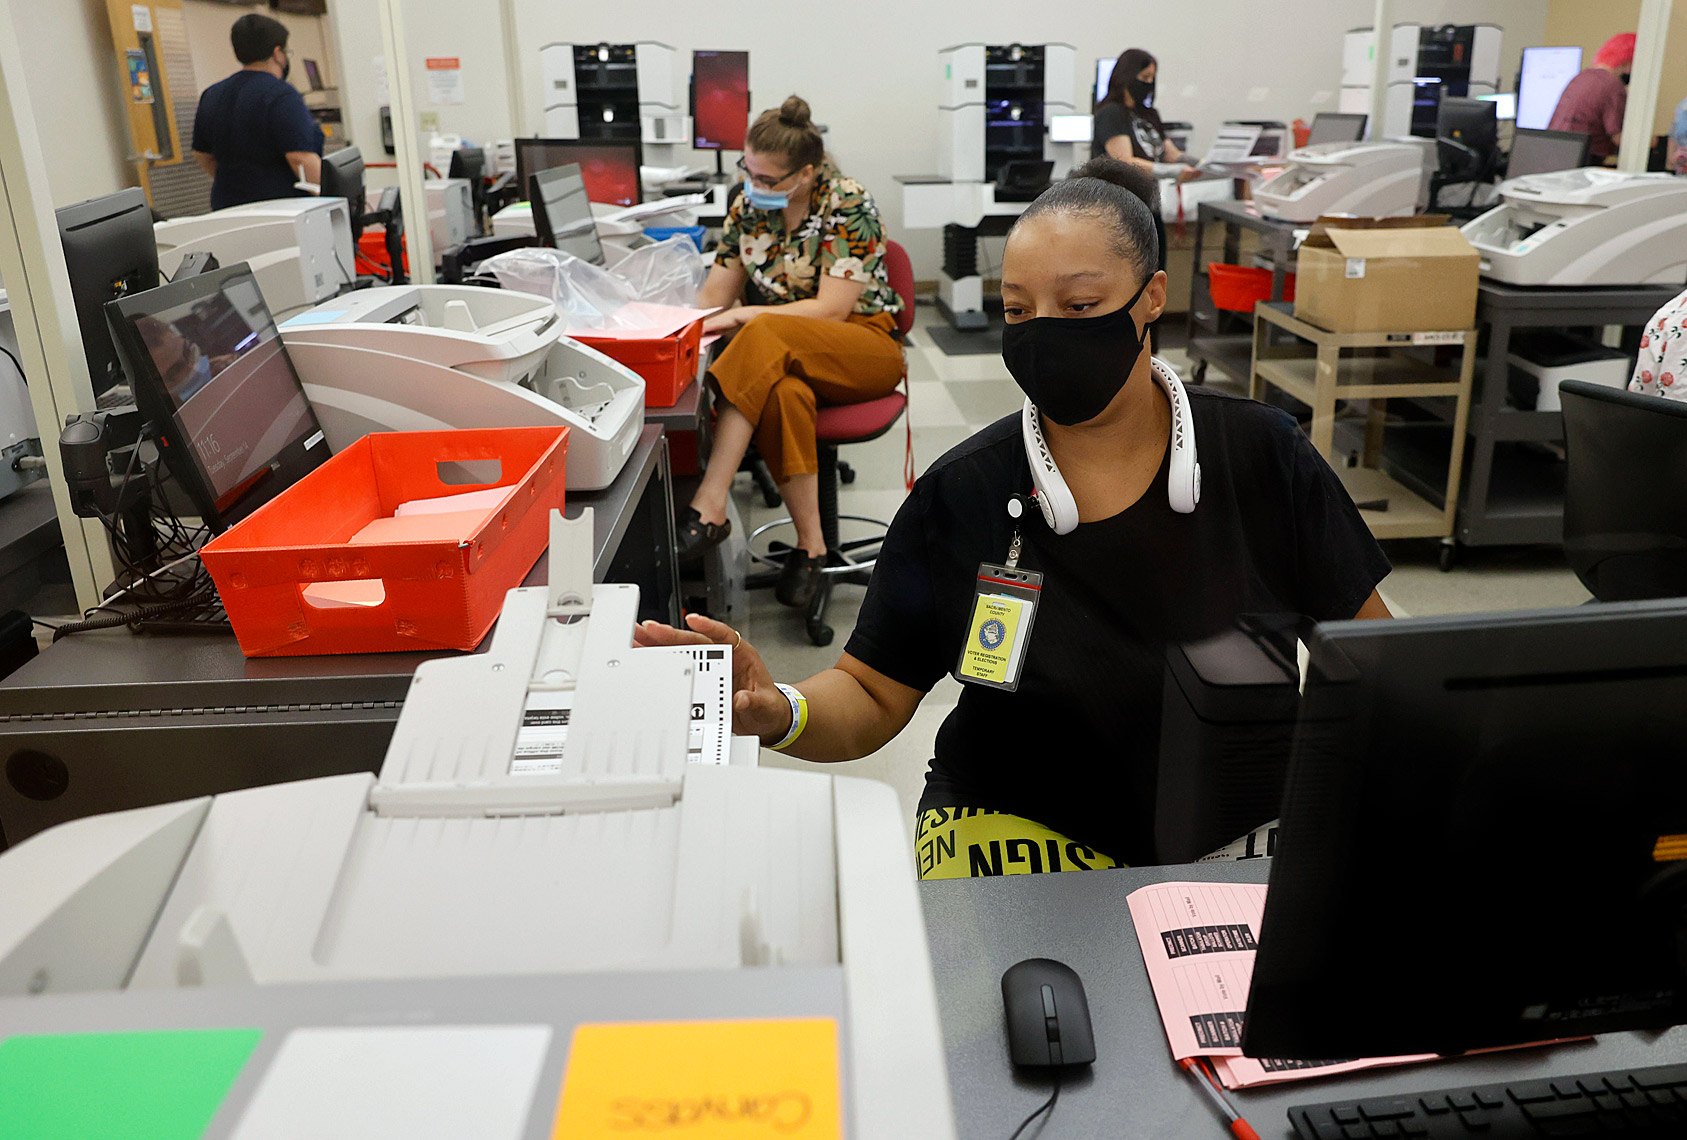 Scanning Ballots During CA Recall Election